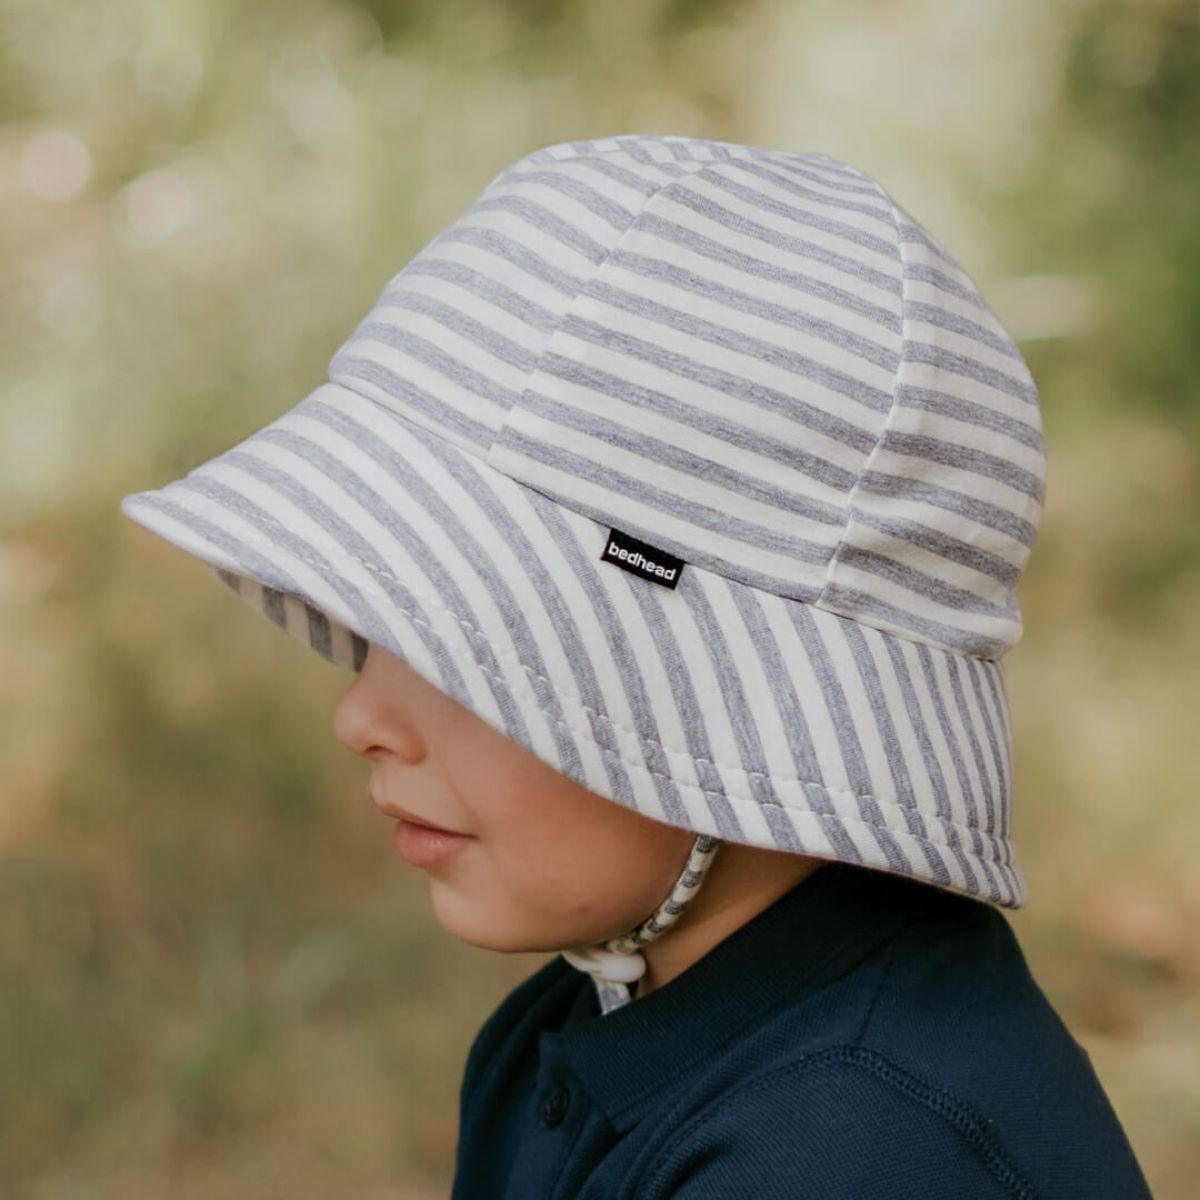 Bedhead Baby Bucket Hat with Strap - Limited Edition - Grey Marle Stripe